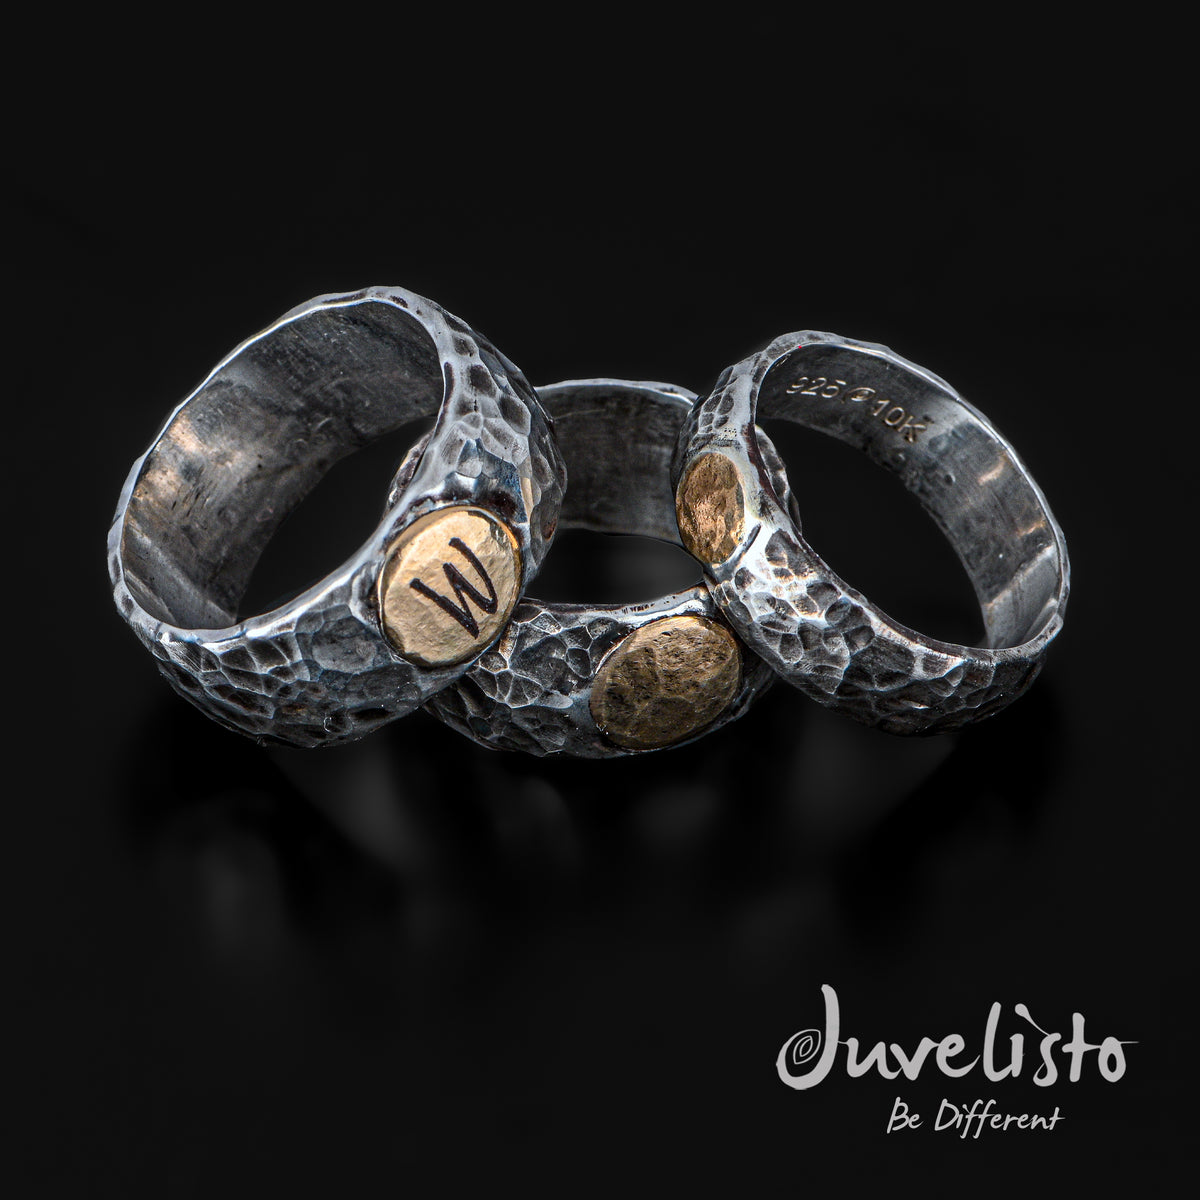 Juvelisto Design | Oxidized Sterling Silver and Gold Hammered Band